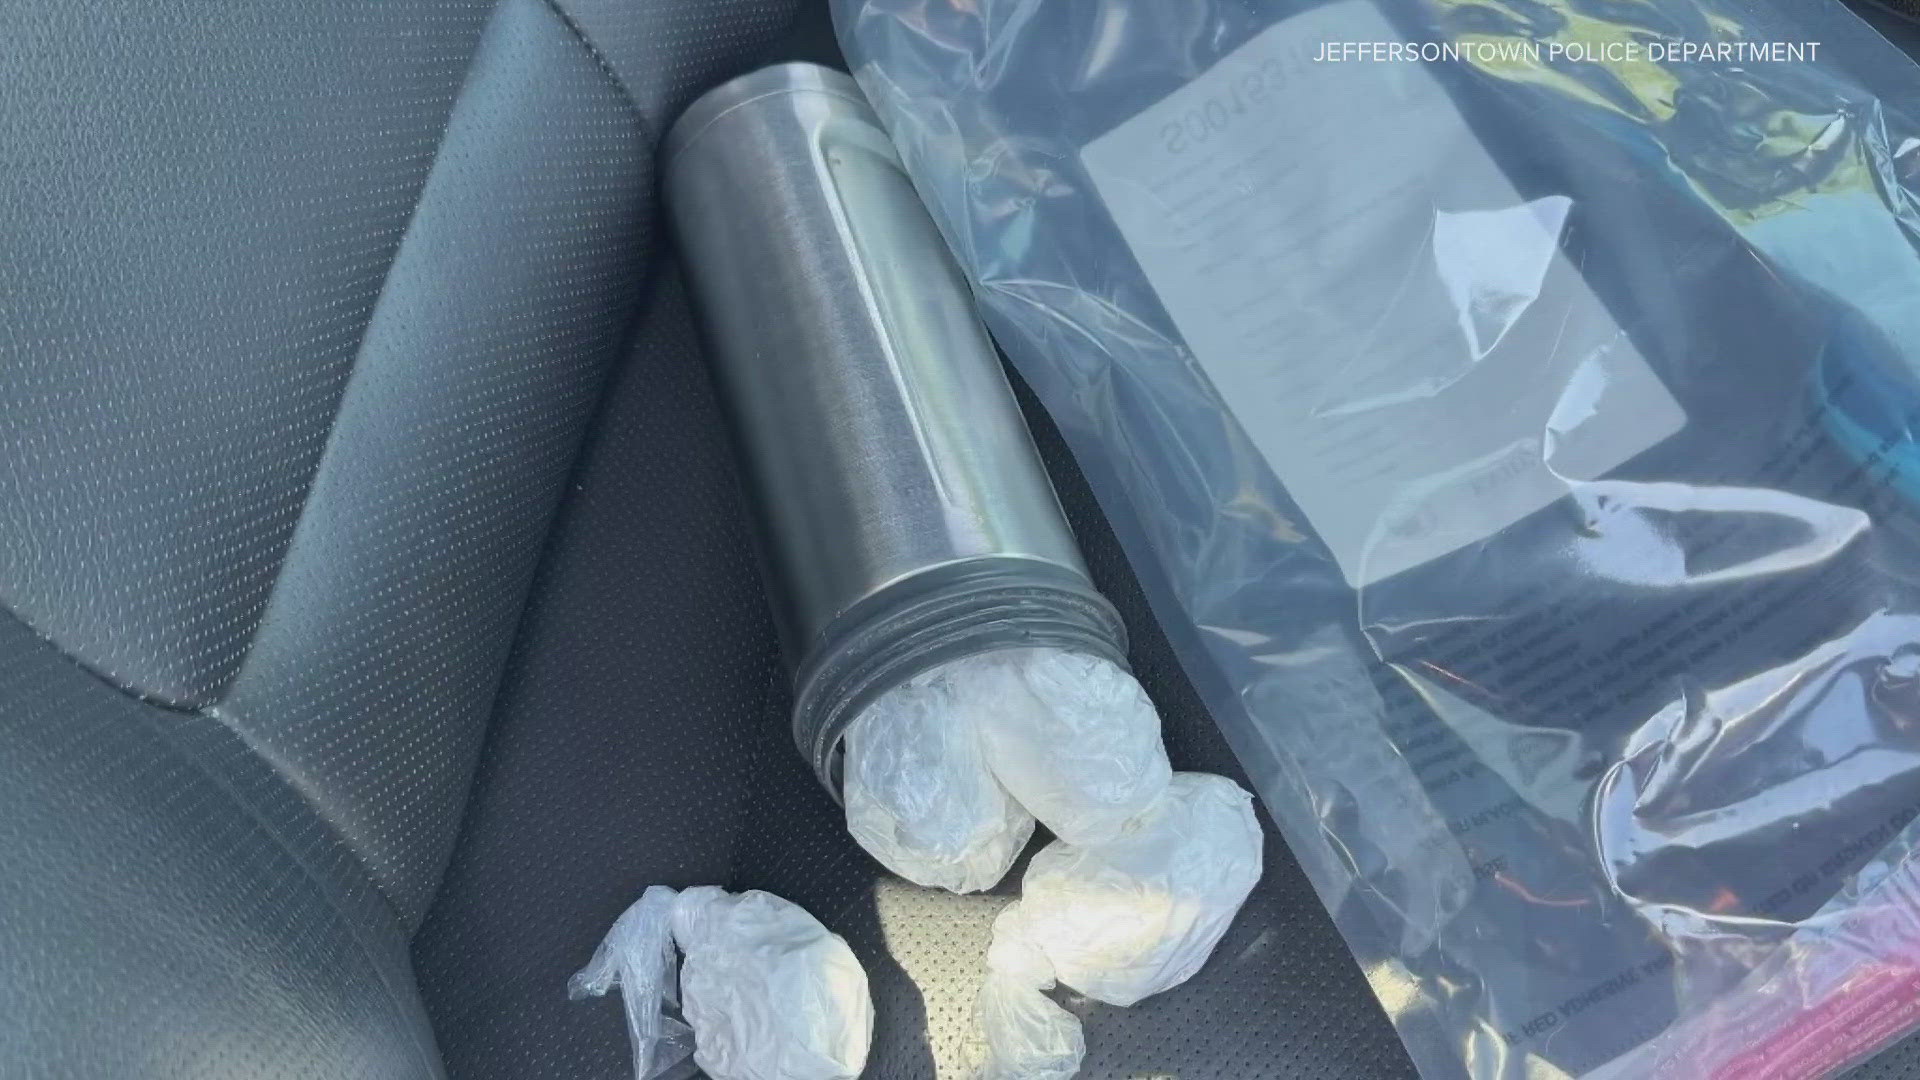 Authorities said the amount of fentanyl seized could kill the population of Louisville several times over.